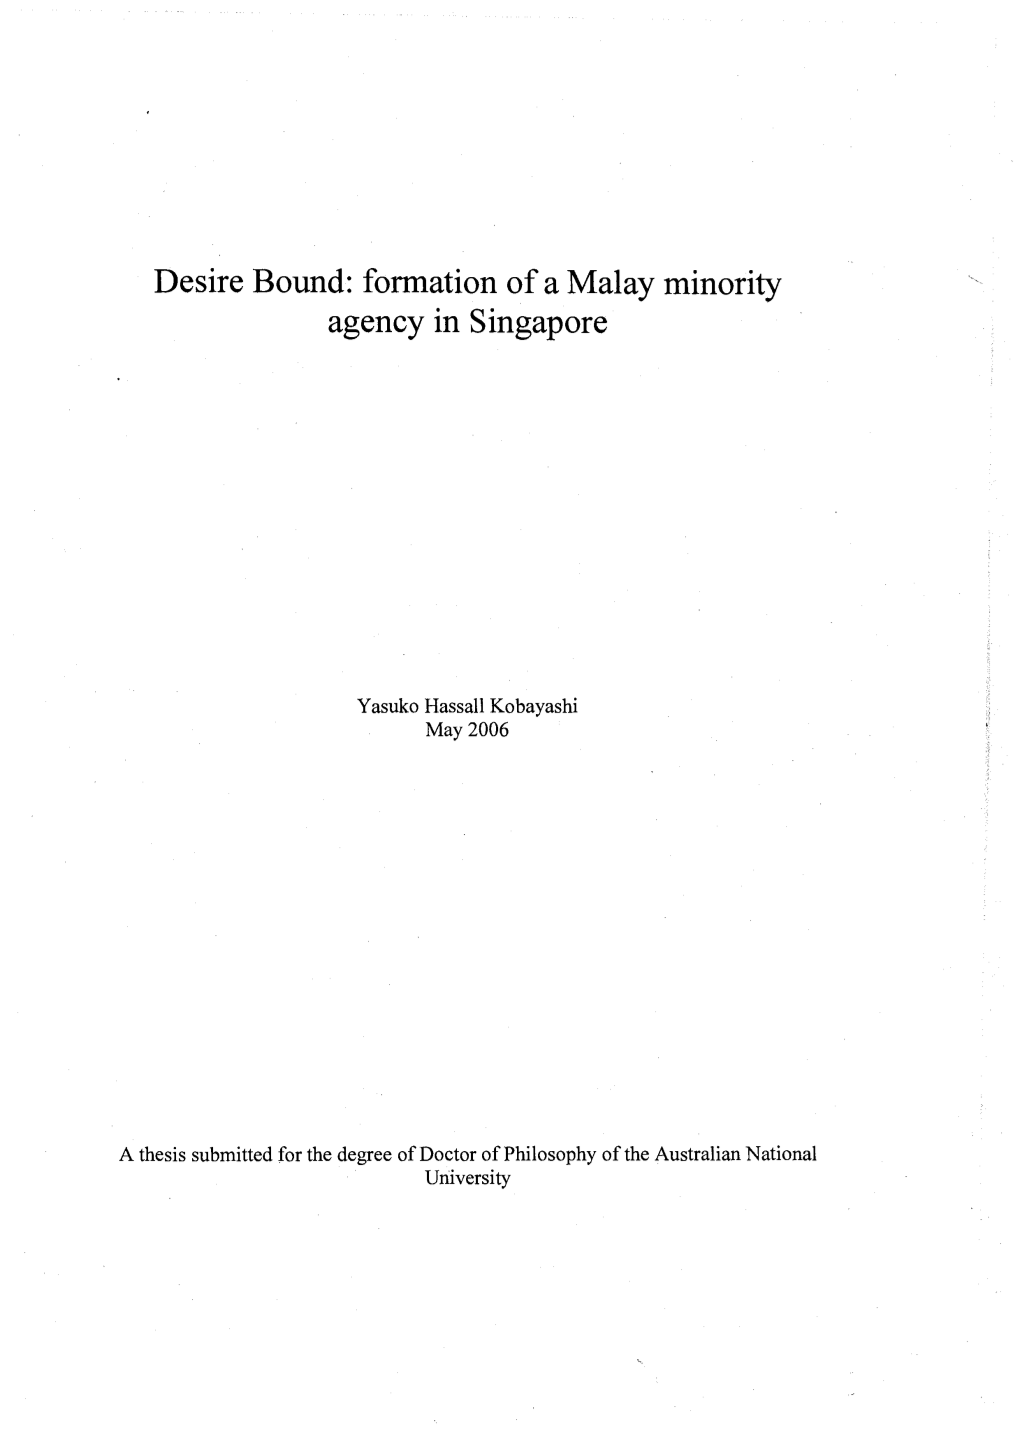 Formation of a Malay Minority Agency in Singapore